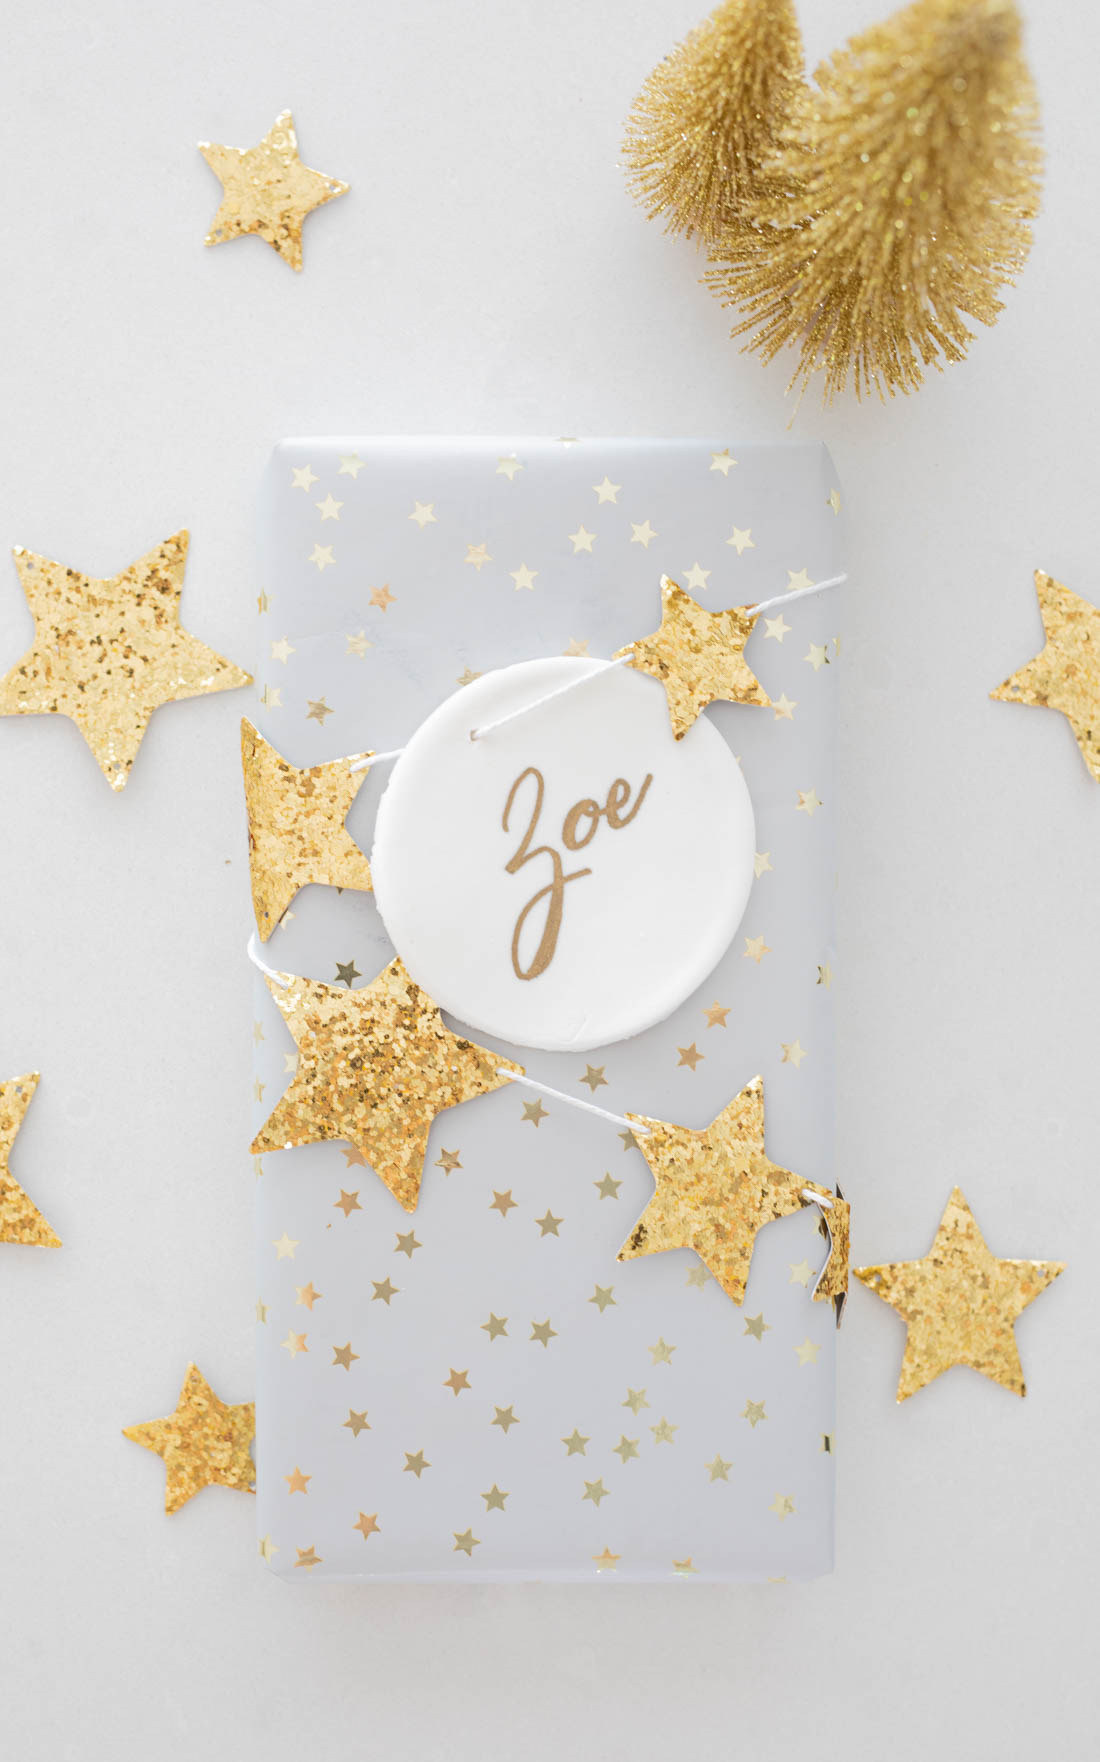 Gold star gift wrapping with DIY Christmas clay ornament